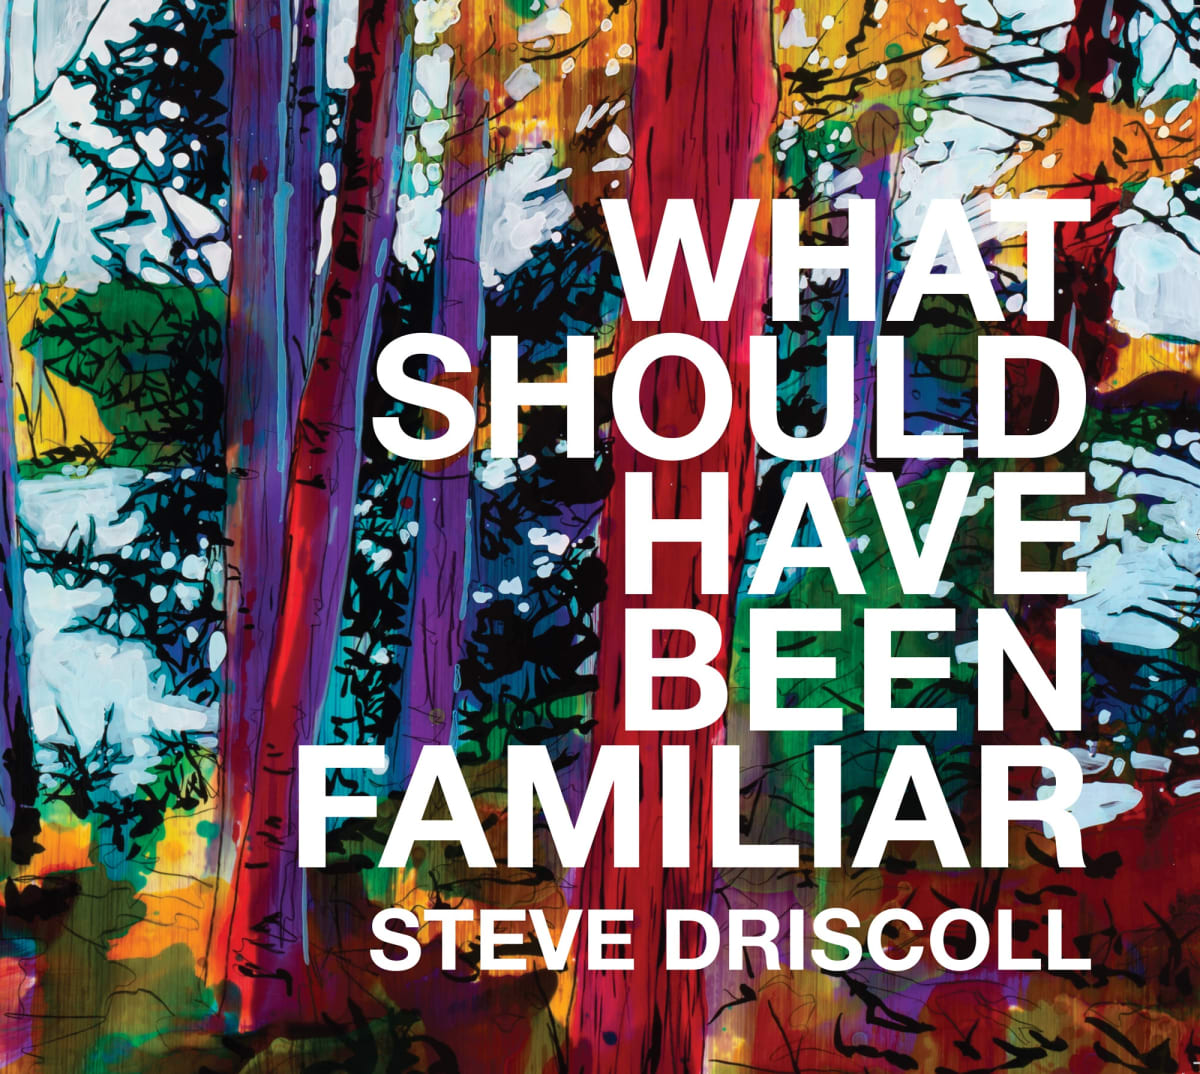 Steve Driscoll | What should have been familiar